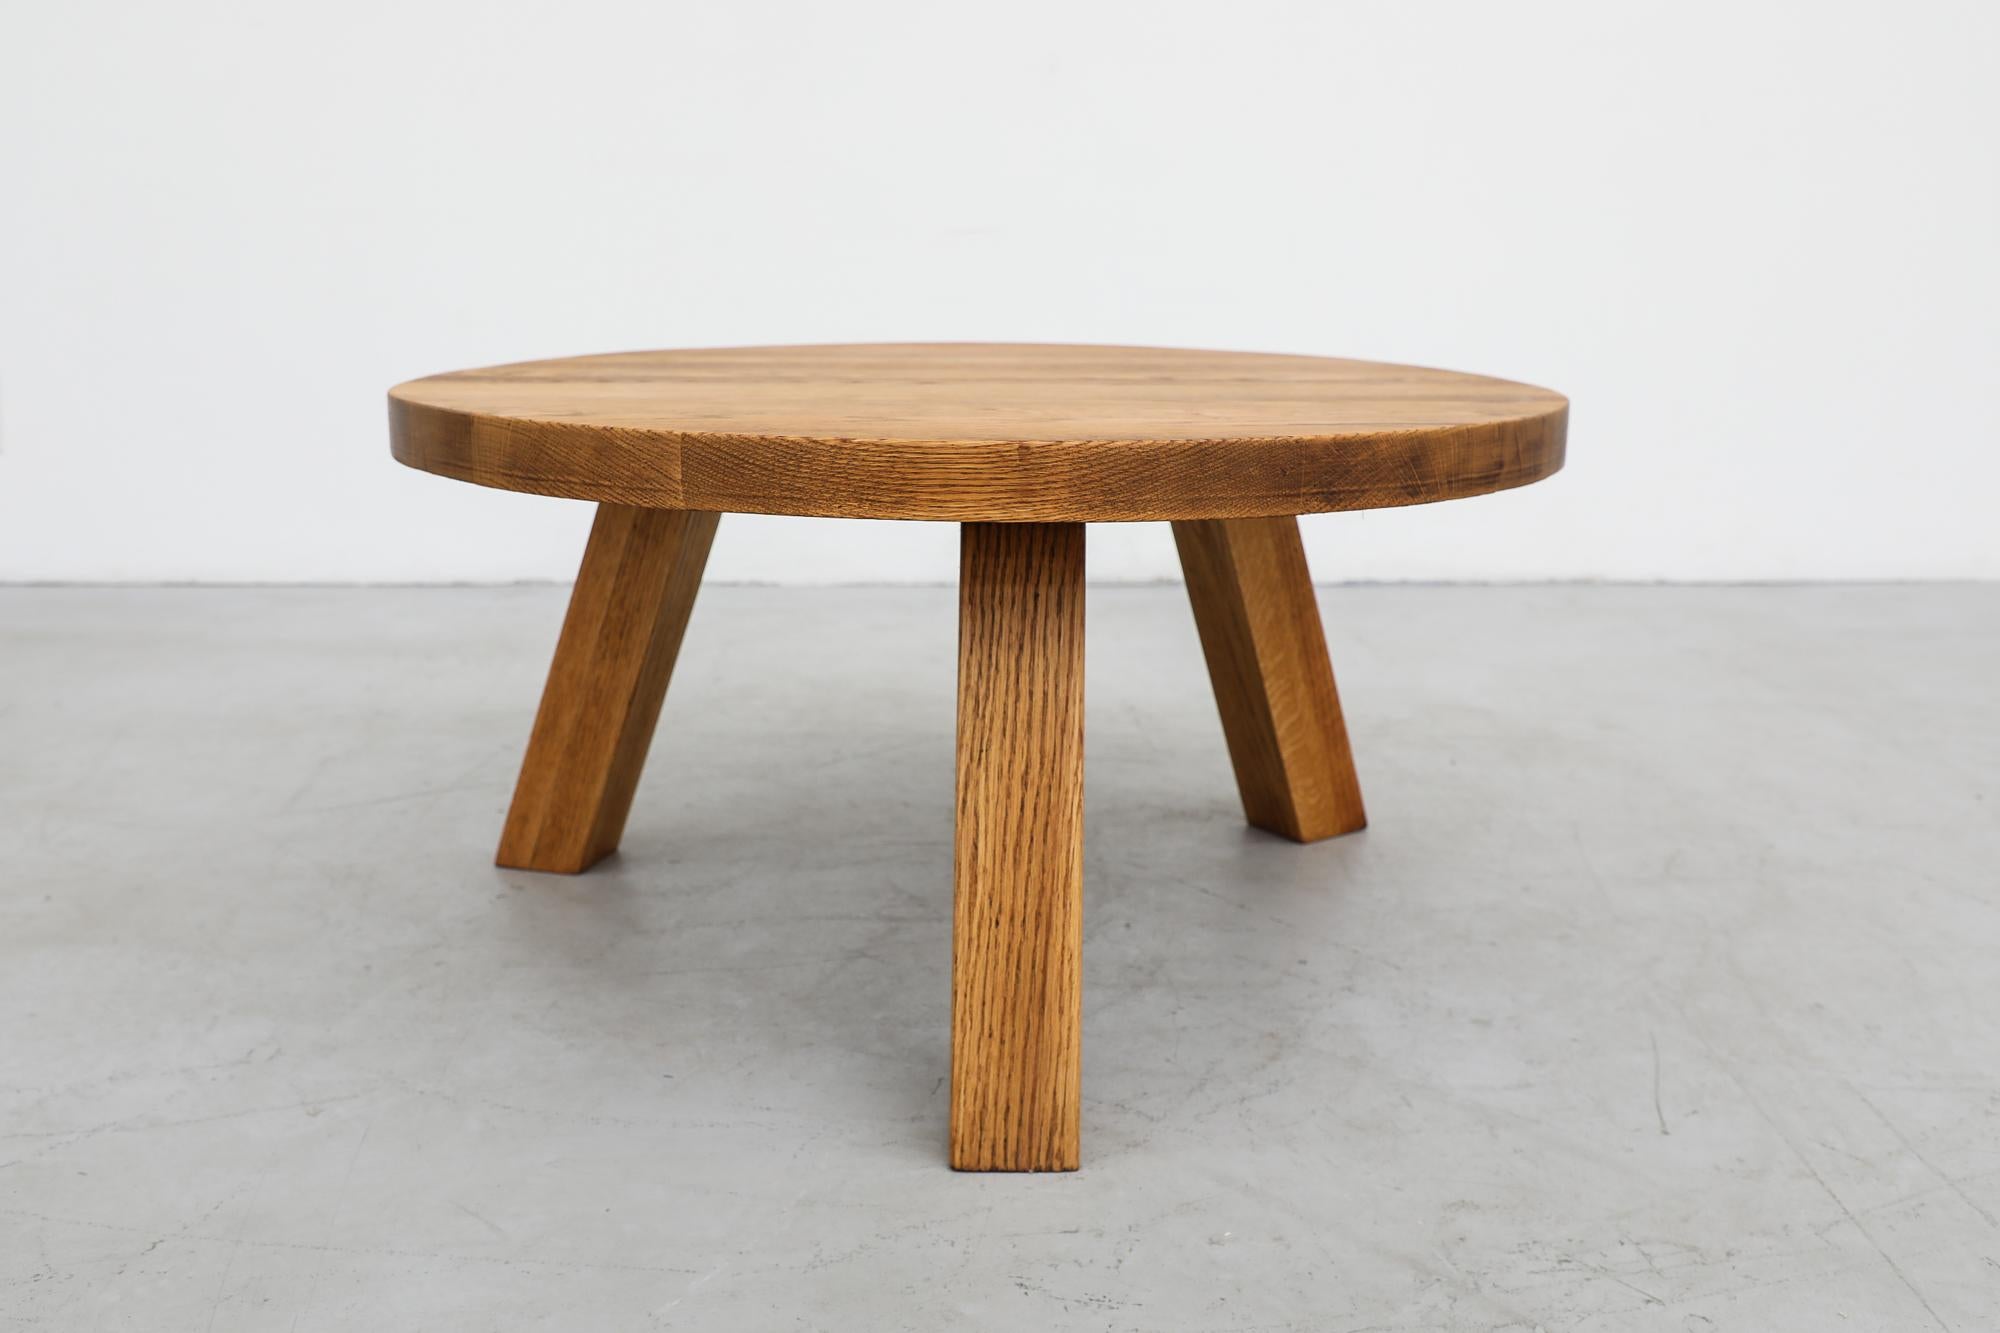 Late 20th Century Pierre Chapo Inspired Heavy Brutalist Round Oak Coffee Table